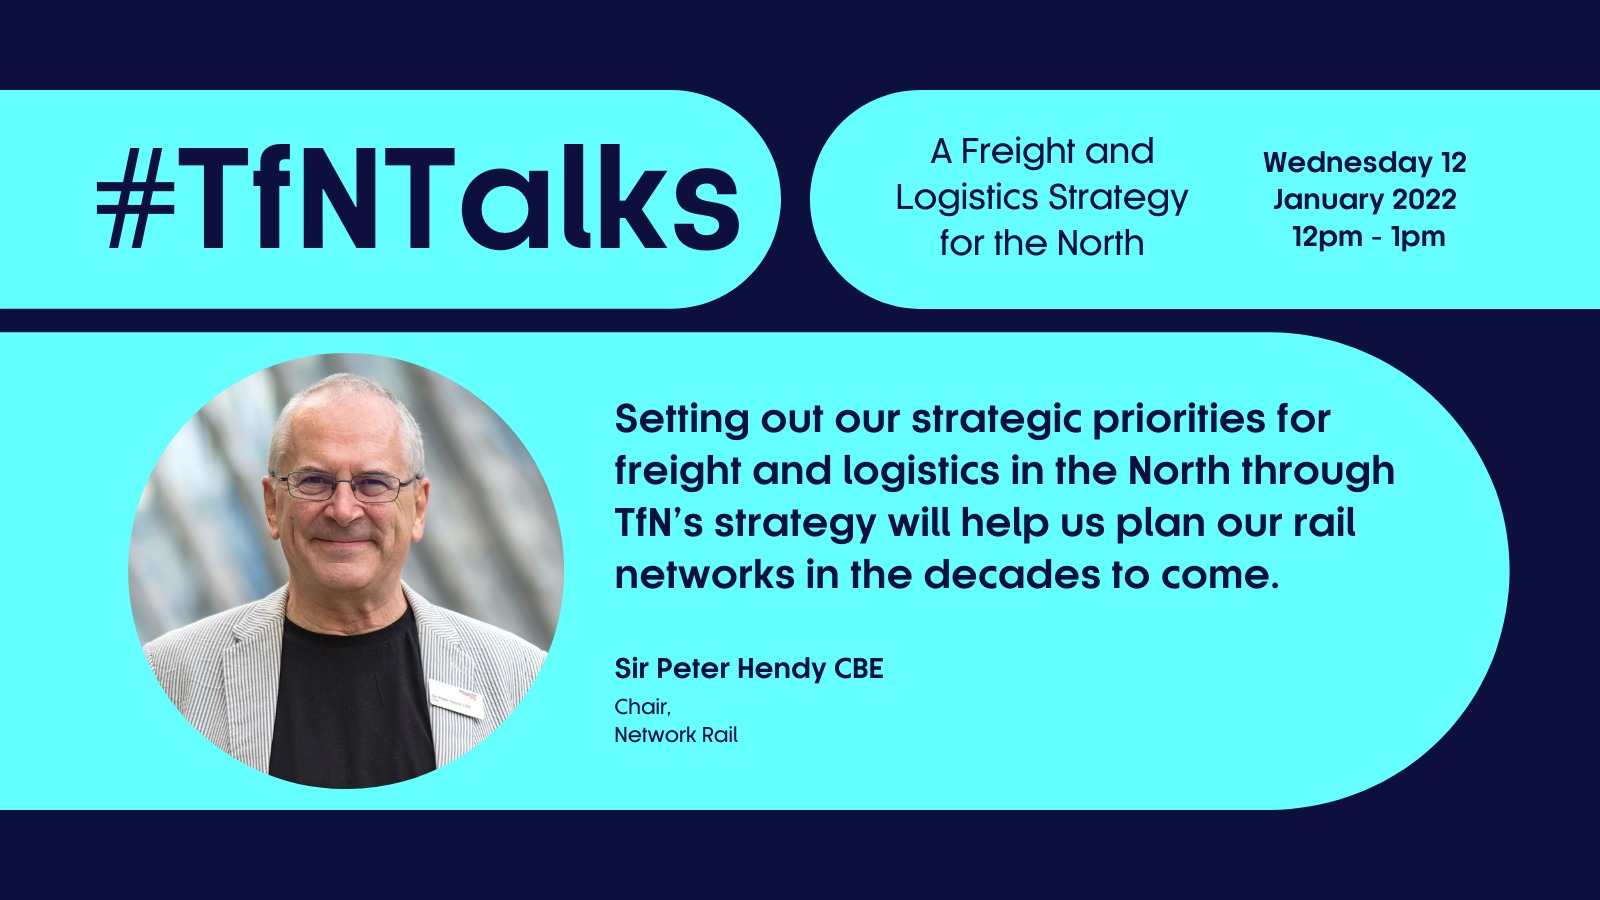 Quote from Sir Peter Hendy CBE ahead of TfNTalks event on freight and logistics stratgy